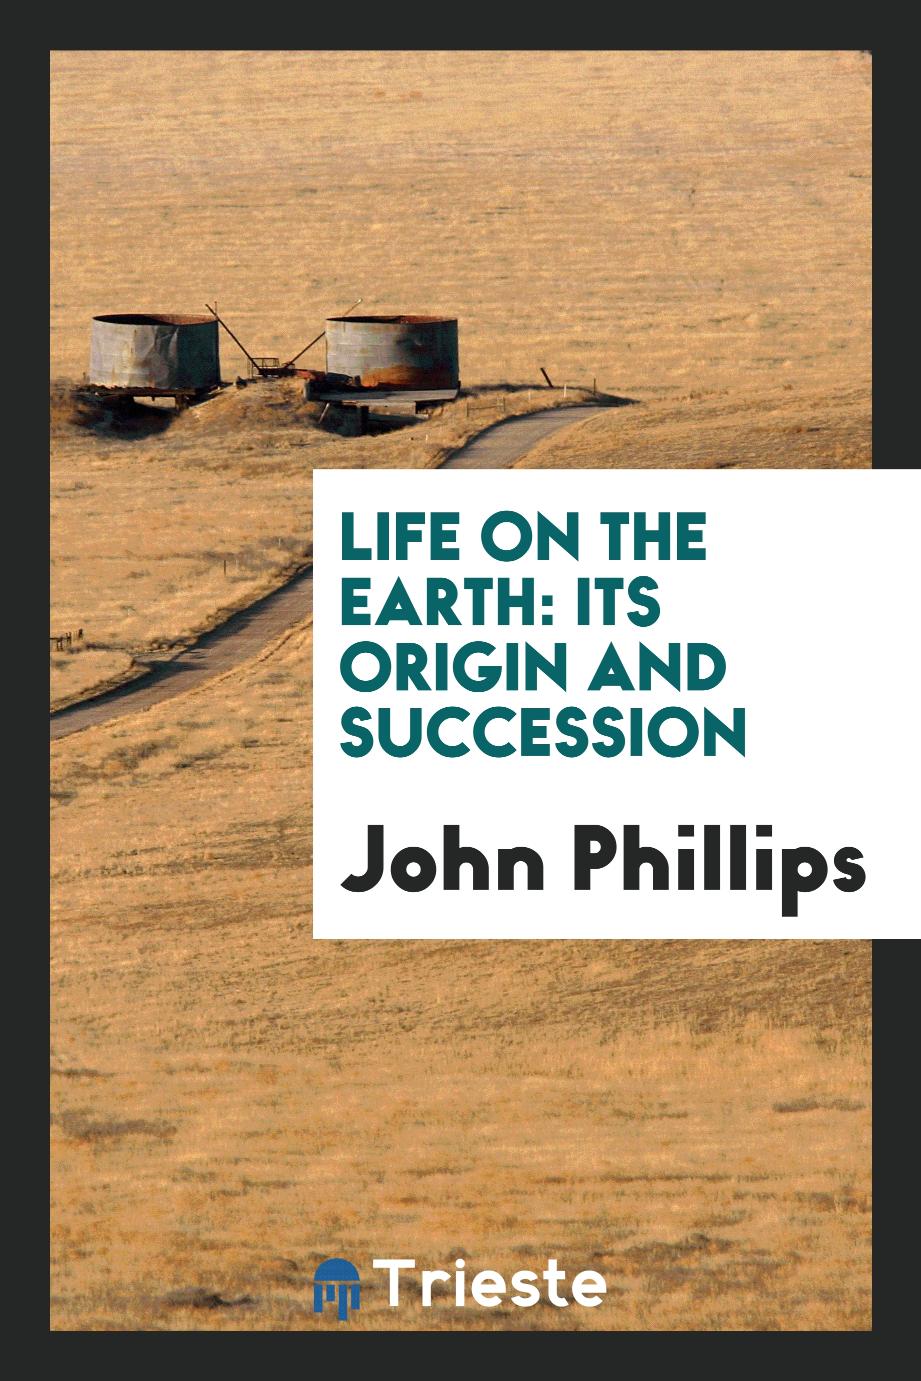 Life on the Earth: Its Origin and Succession